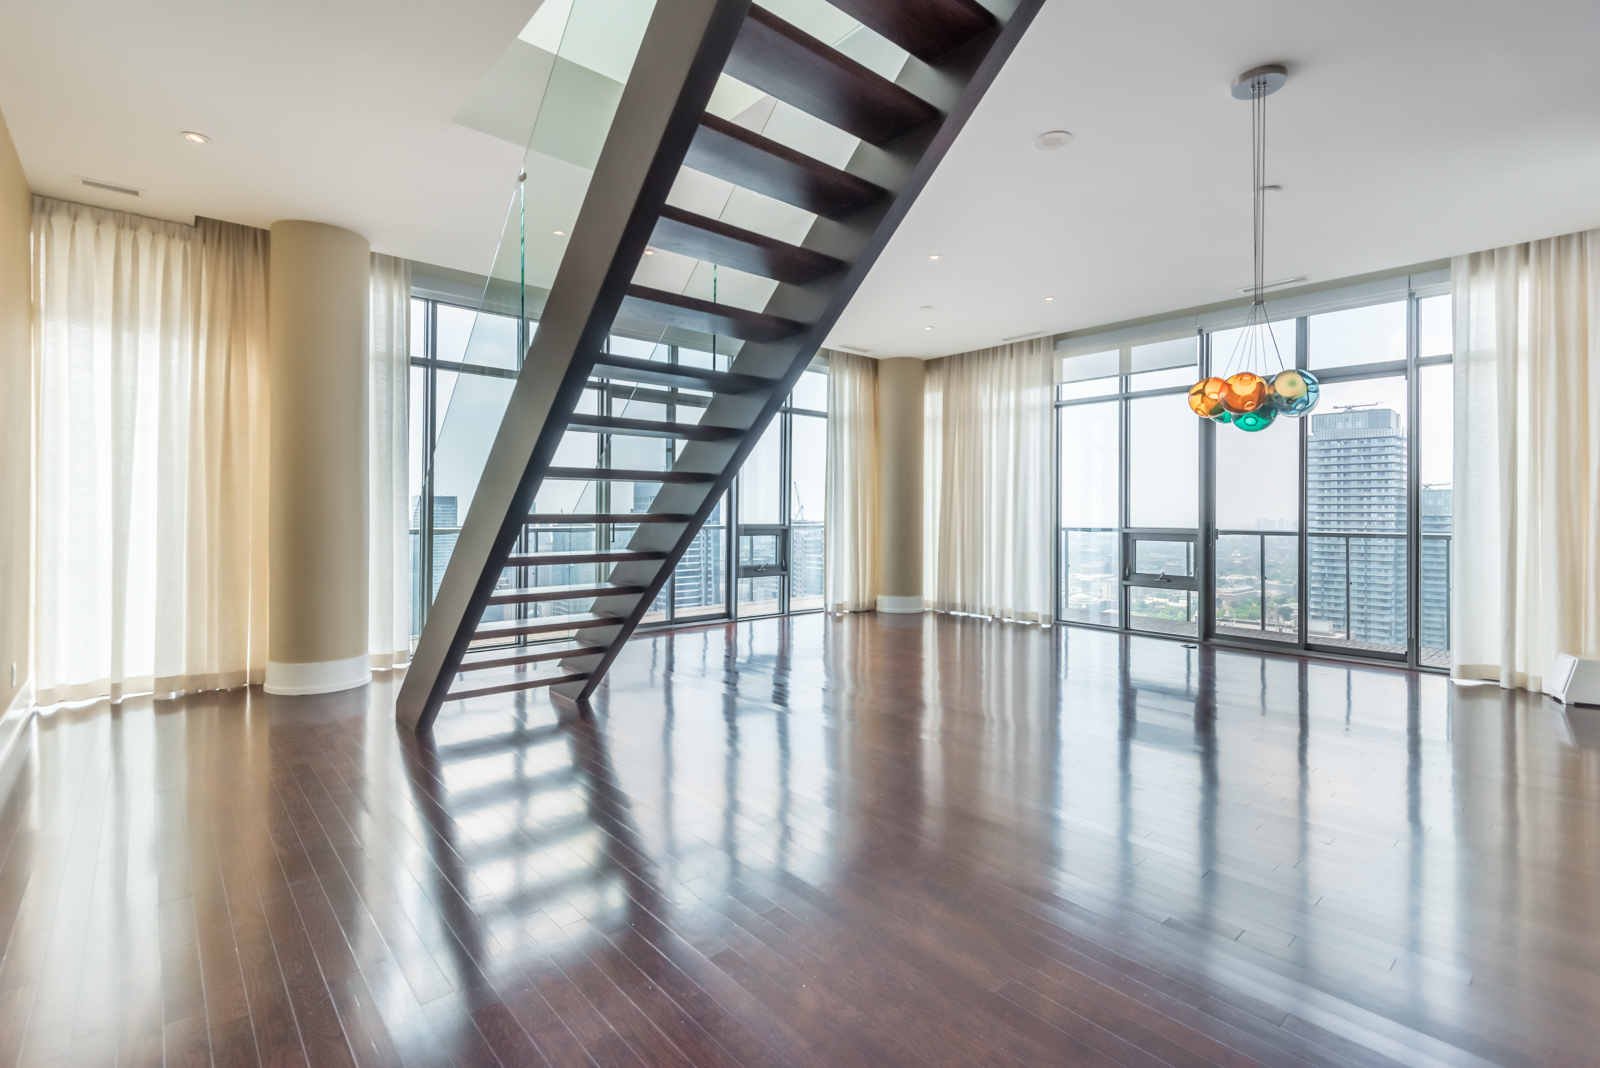 Empty penthouse with shiny floors and staircase with glass panels; most expensive property at 33 Charles St E Casa Condos.